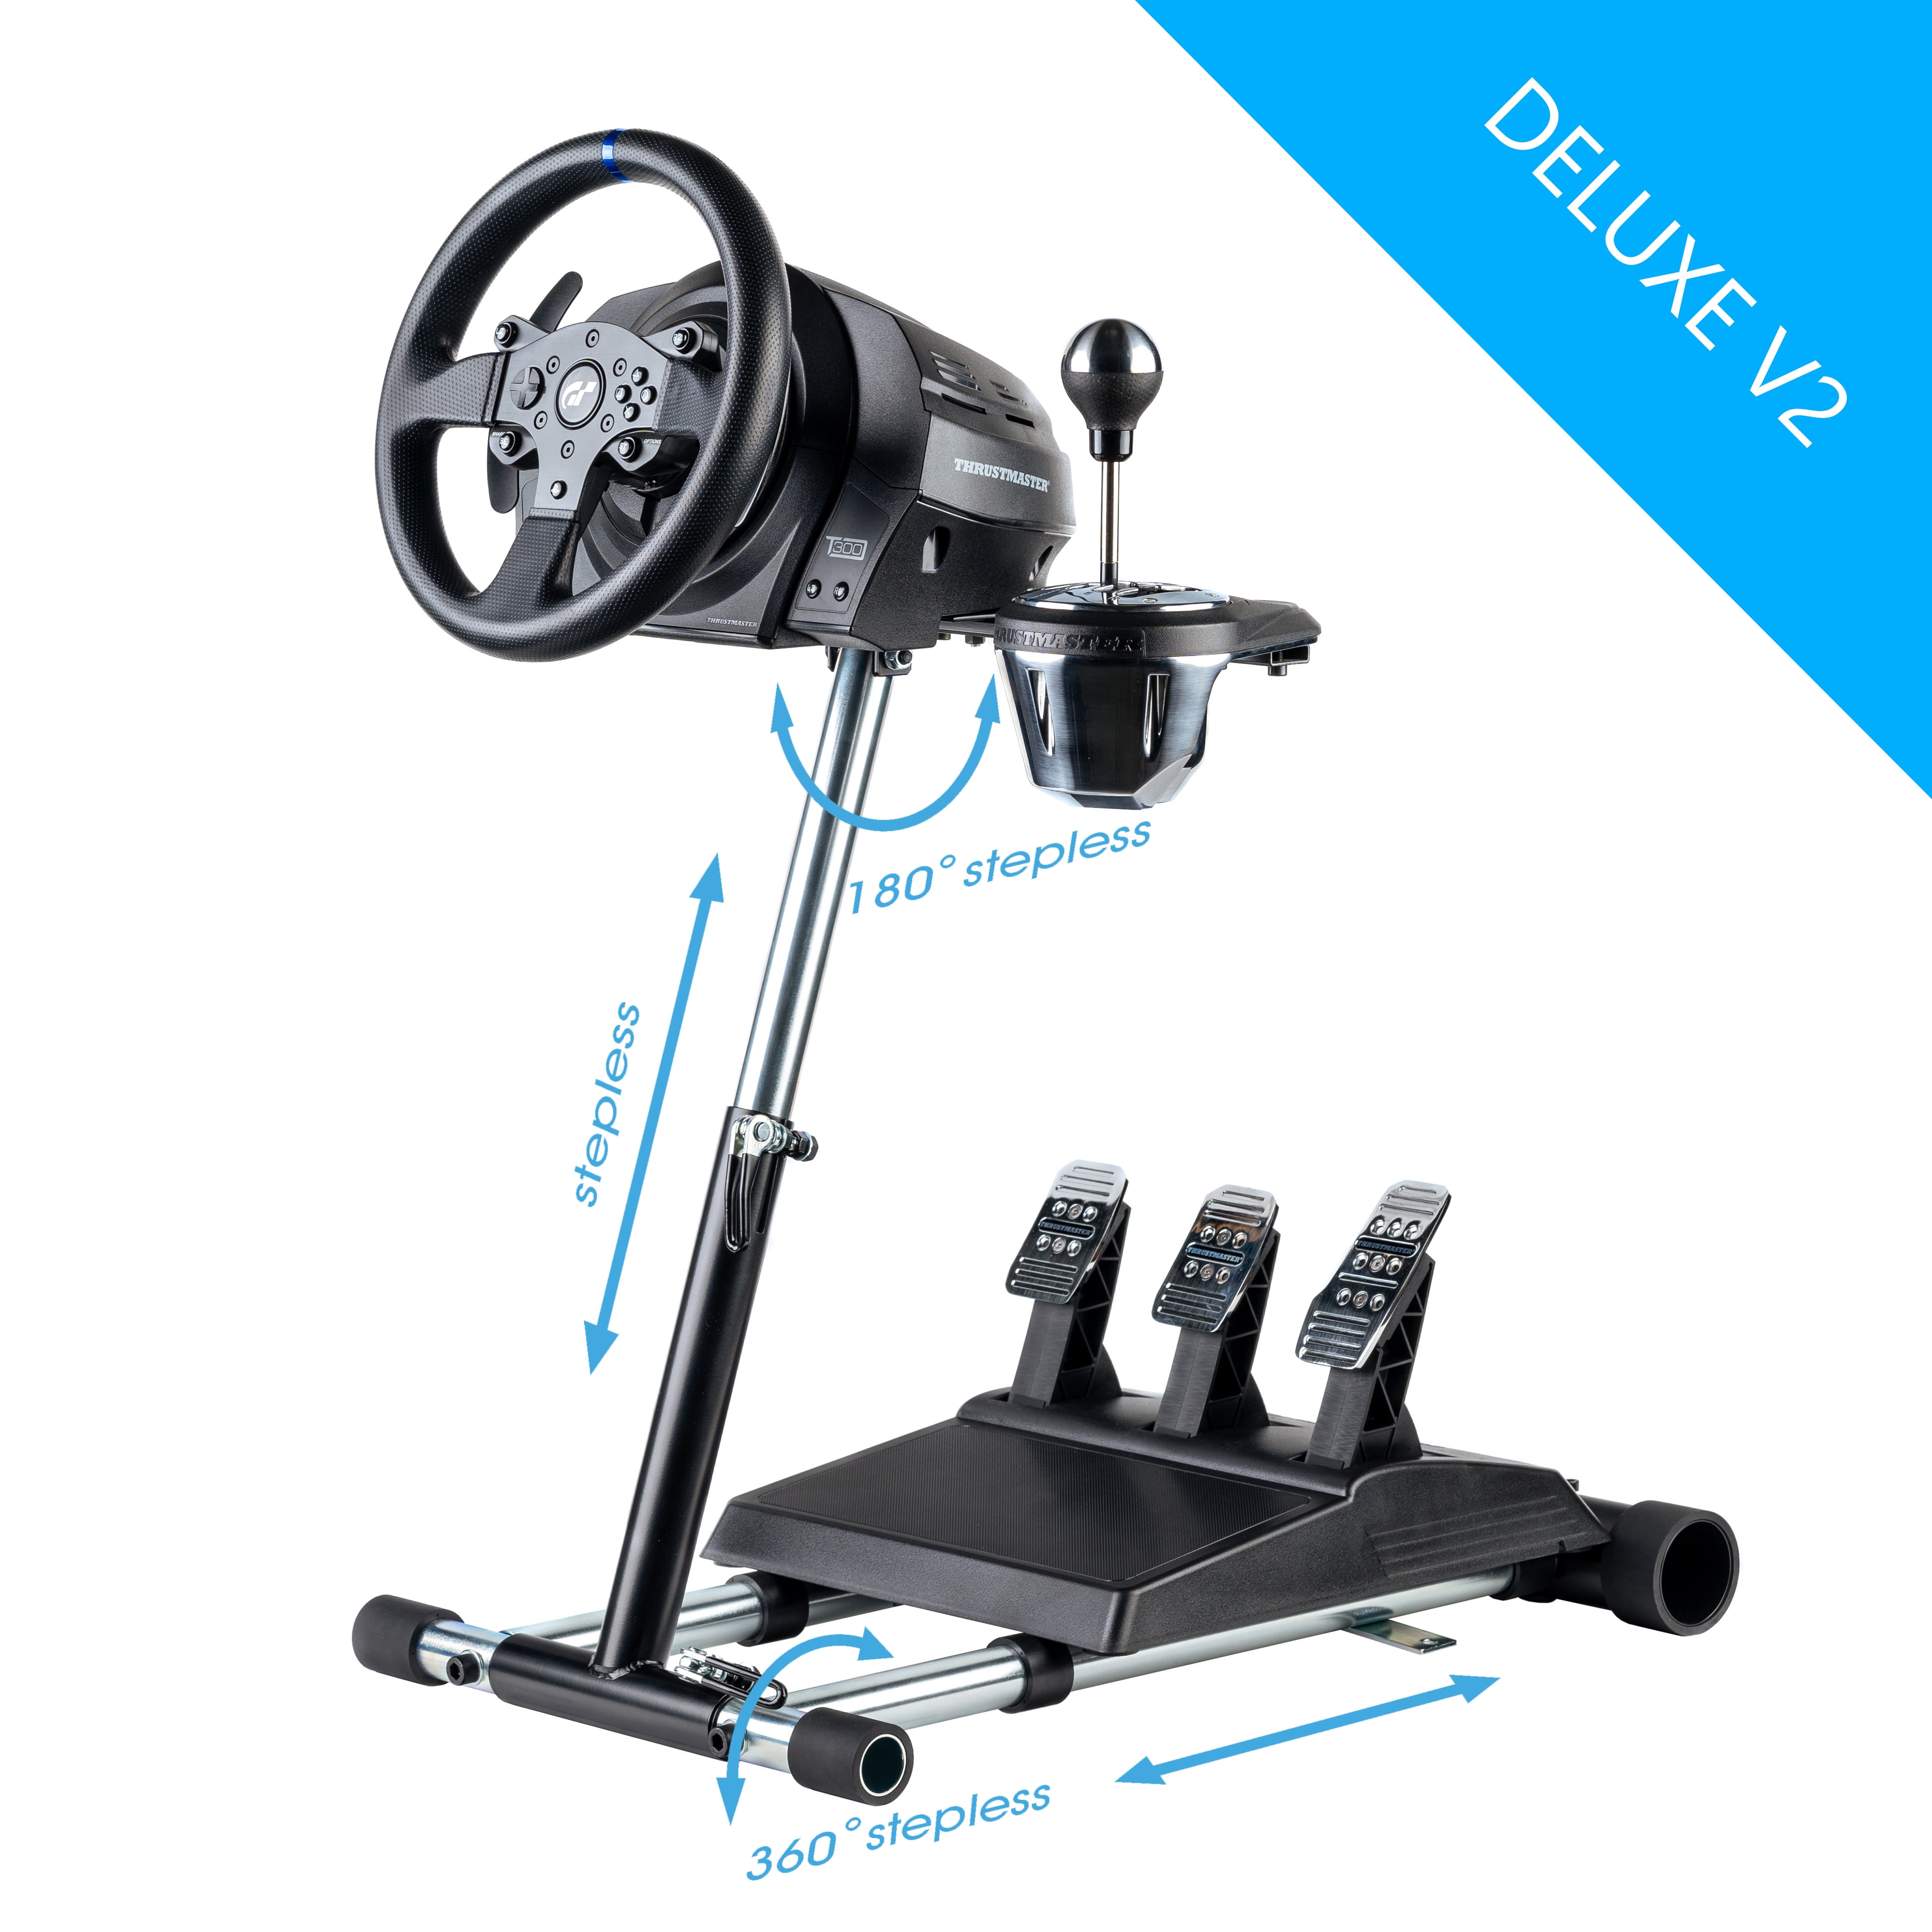 Wheel Stand Pro TX Deluxe V2 Racing Steering Wheelstand Compatible With Thrustmaster T300RS(PS4) One)TX Leather,T150 and TMX! Original V2. Wheel and Pedals Not included - Walmart.com